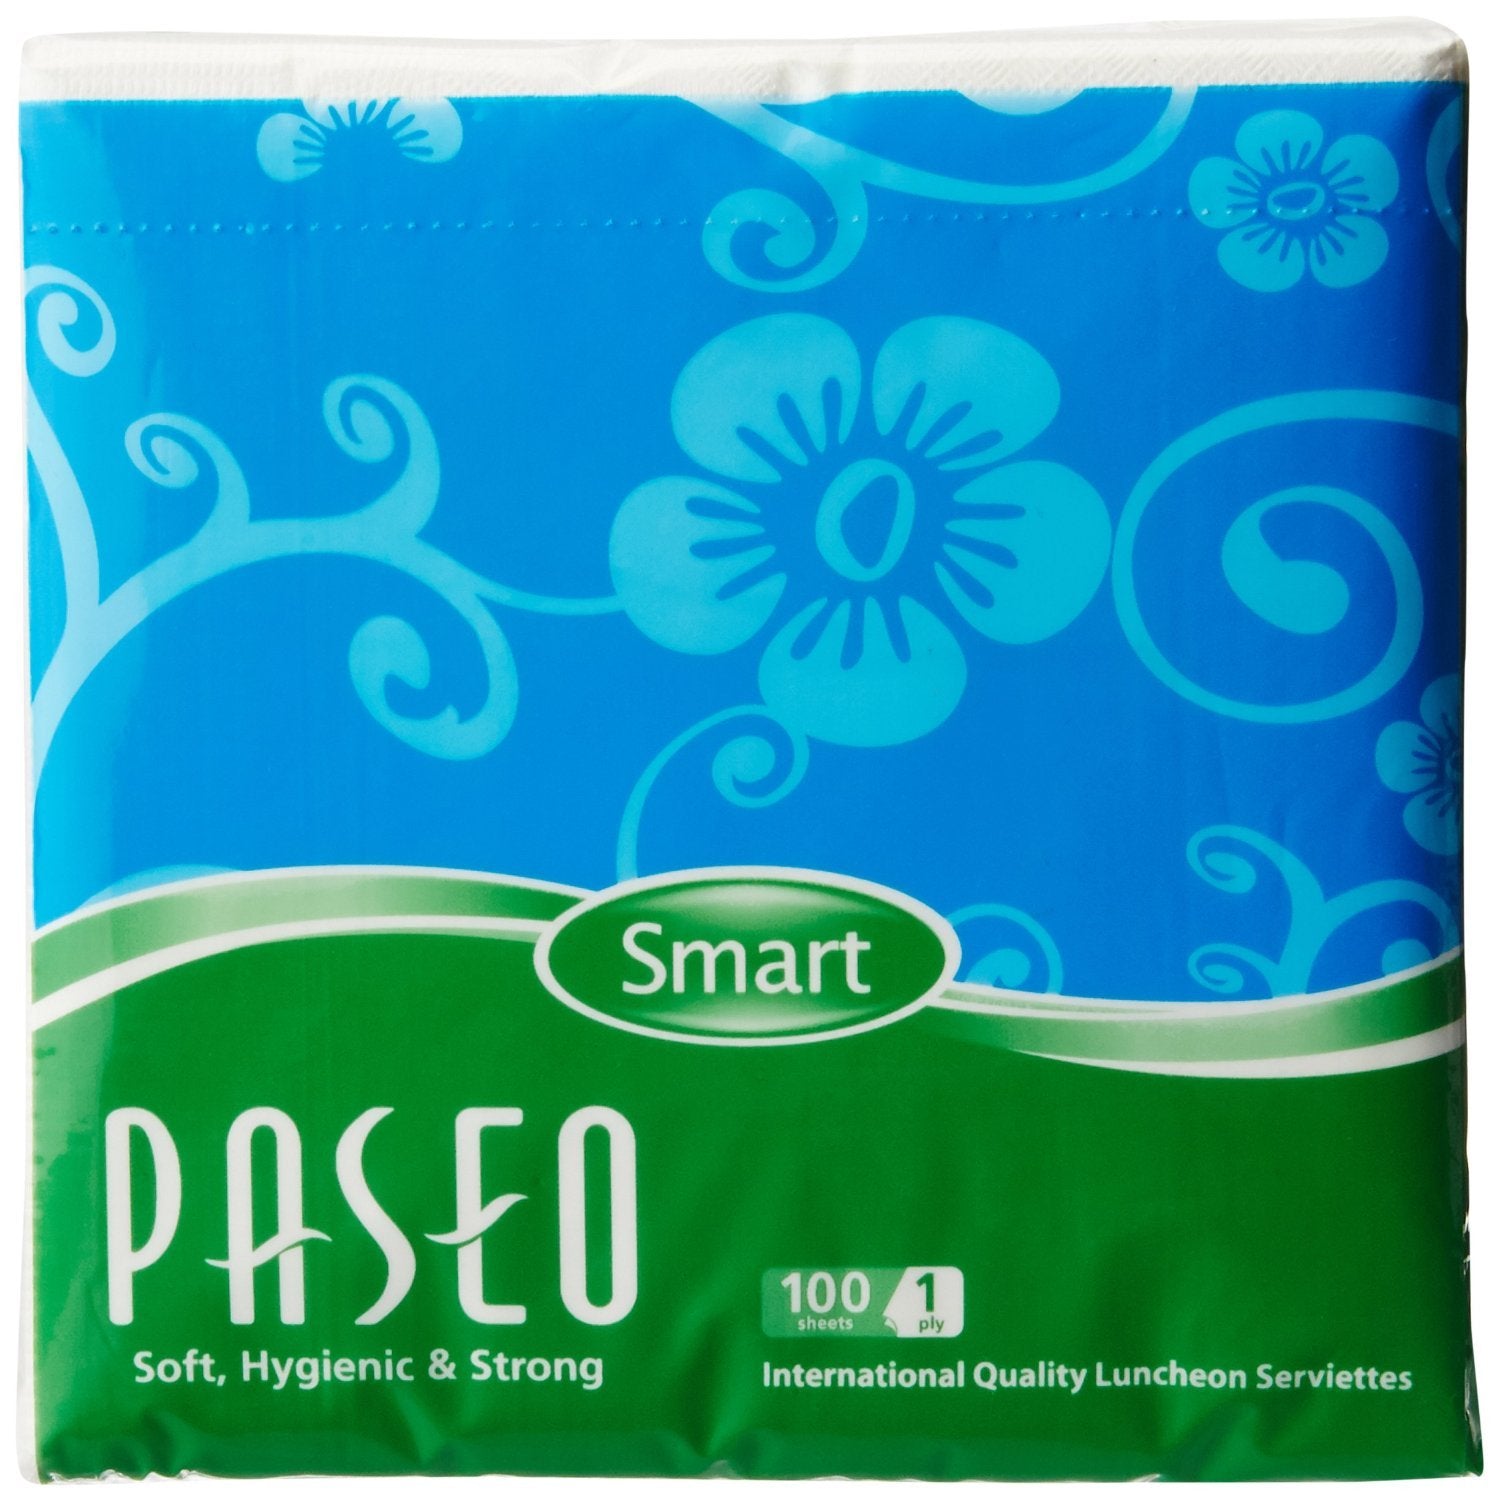 Paseo  Napkins Tissues 1 ply (pack of 12)